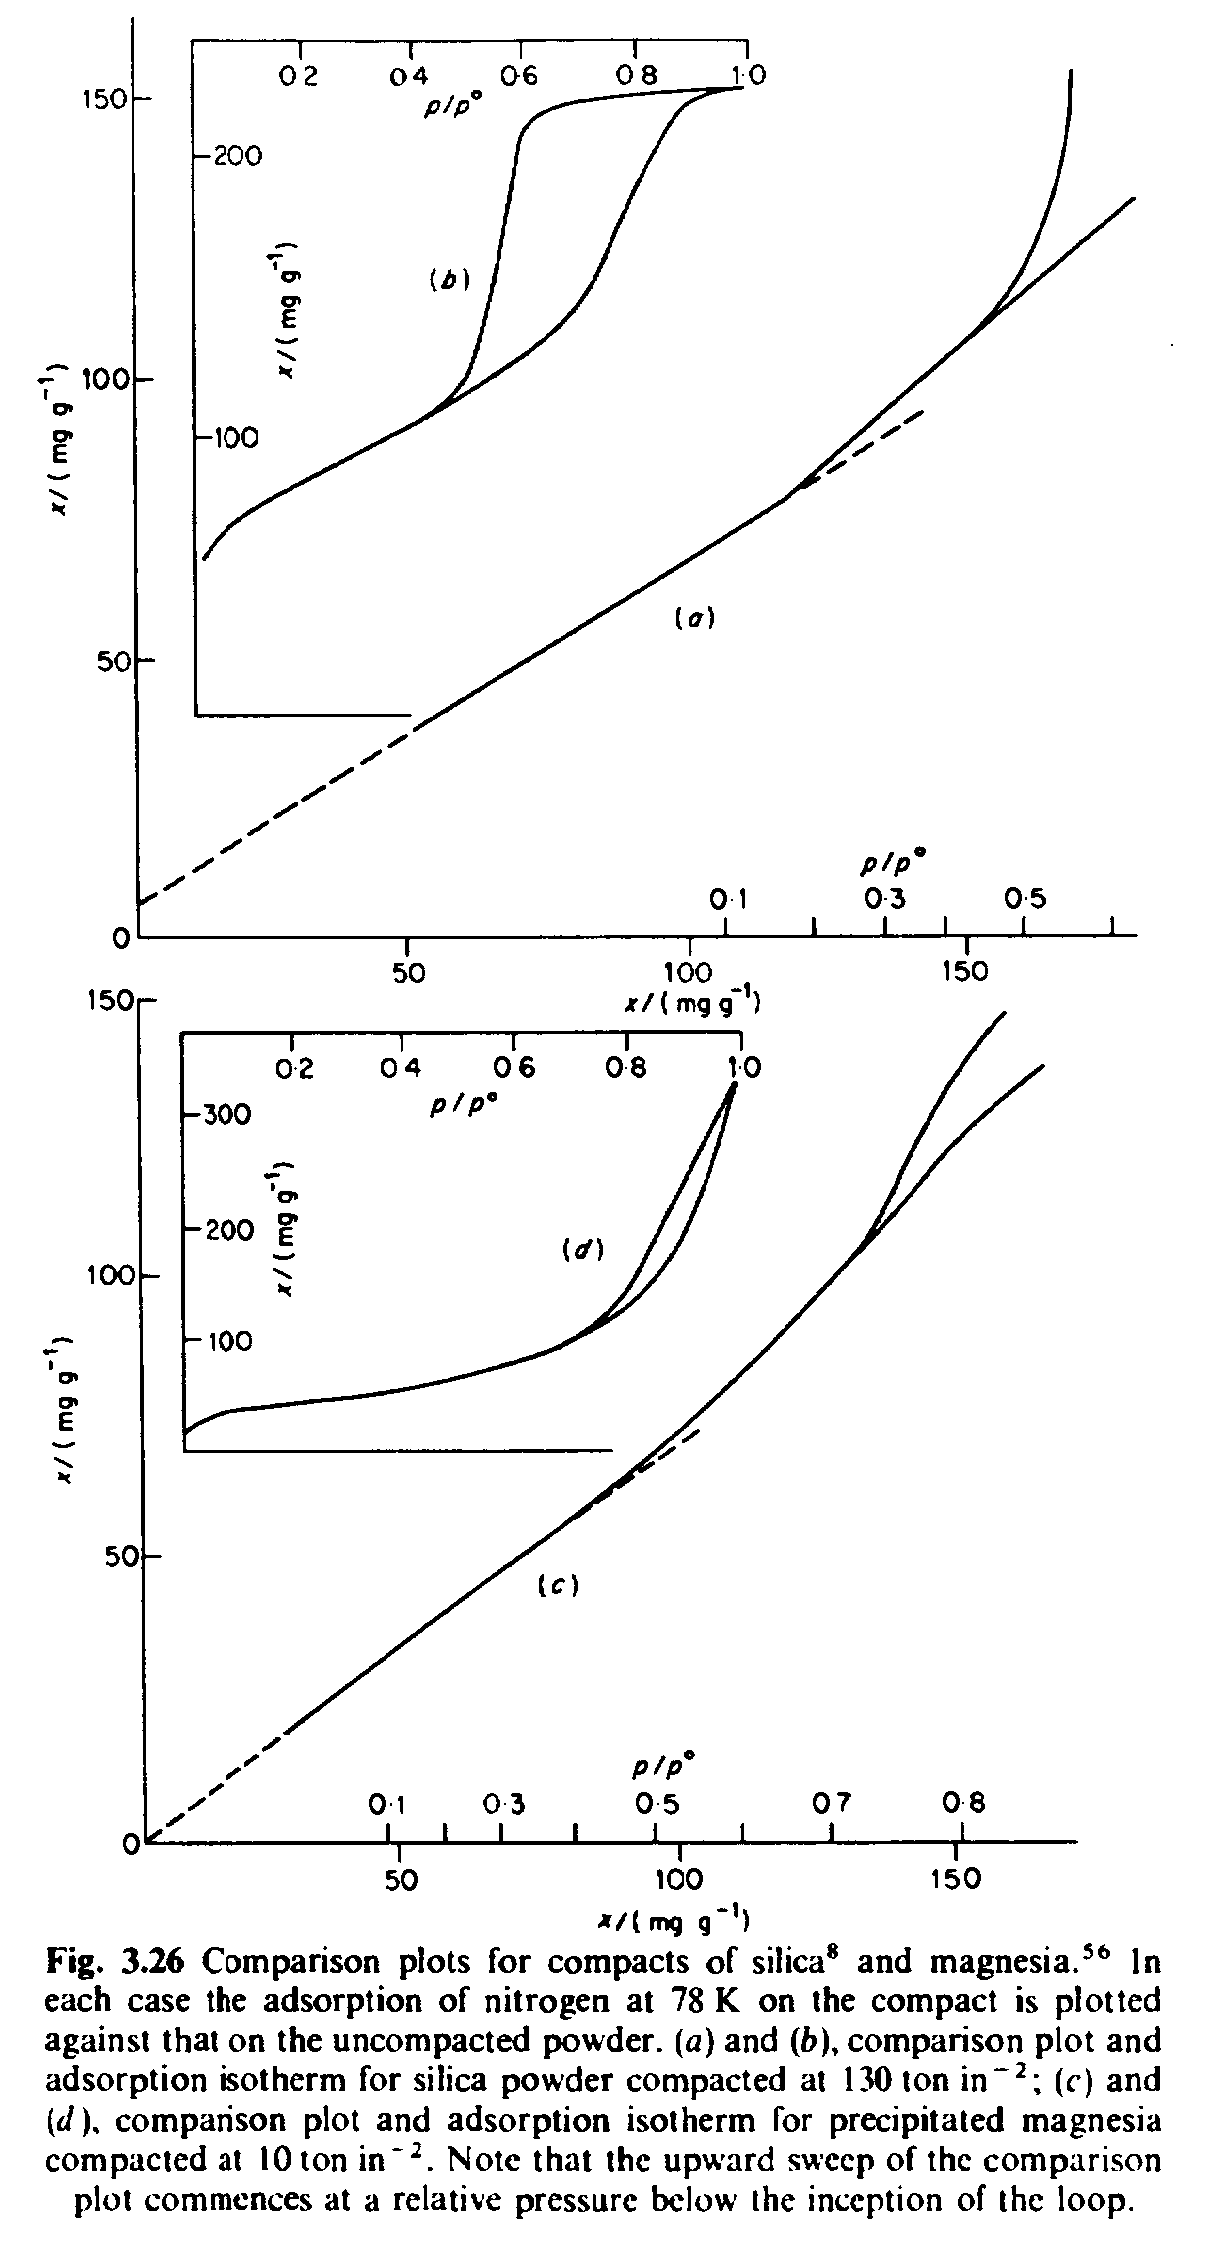 Fig. 3.26 Comparison plots for compacts of silica and magnesia. In each case the adsorption of nitrogen at 78 K on the compact is plotted against that on the uncompacted powder, (a) and (b), comparison plot and adsorption isotherm for silica powder compacted at 130 ton in (c) and (d), comparison plot and adsorption isotherm for precipitated magnesia compacted at 10 ton in. Note that the upward sweep of the comparison plot commences at a relative pressure below the inception of the loop.